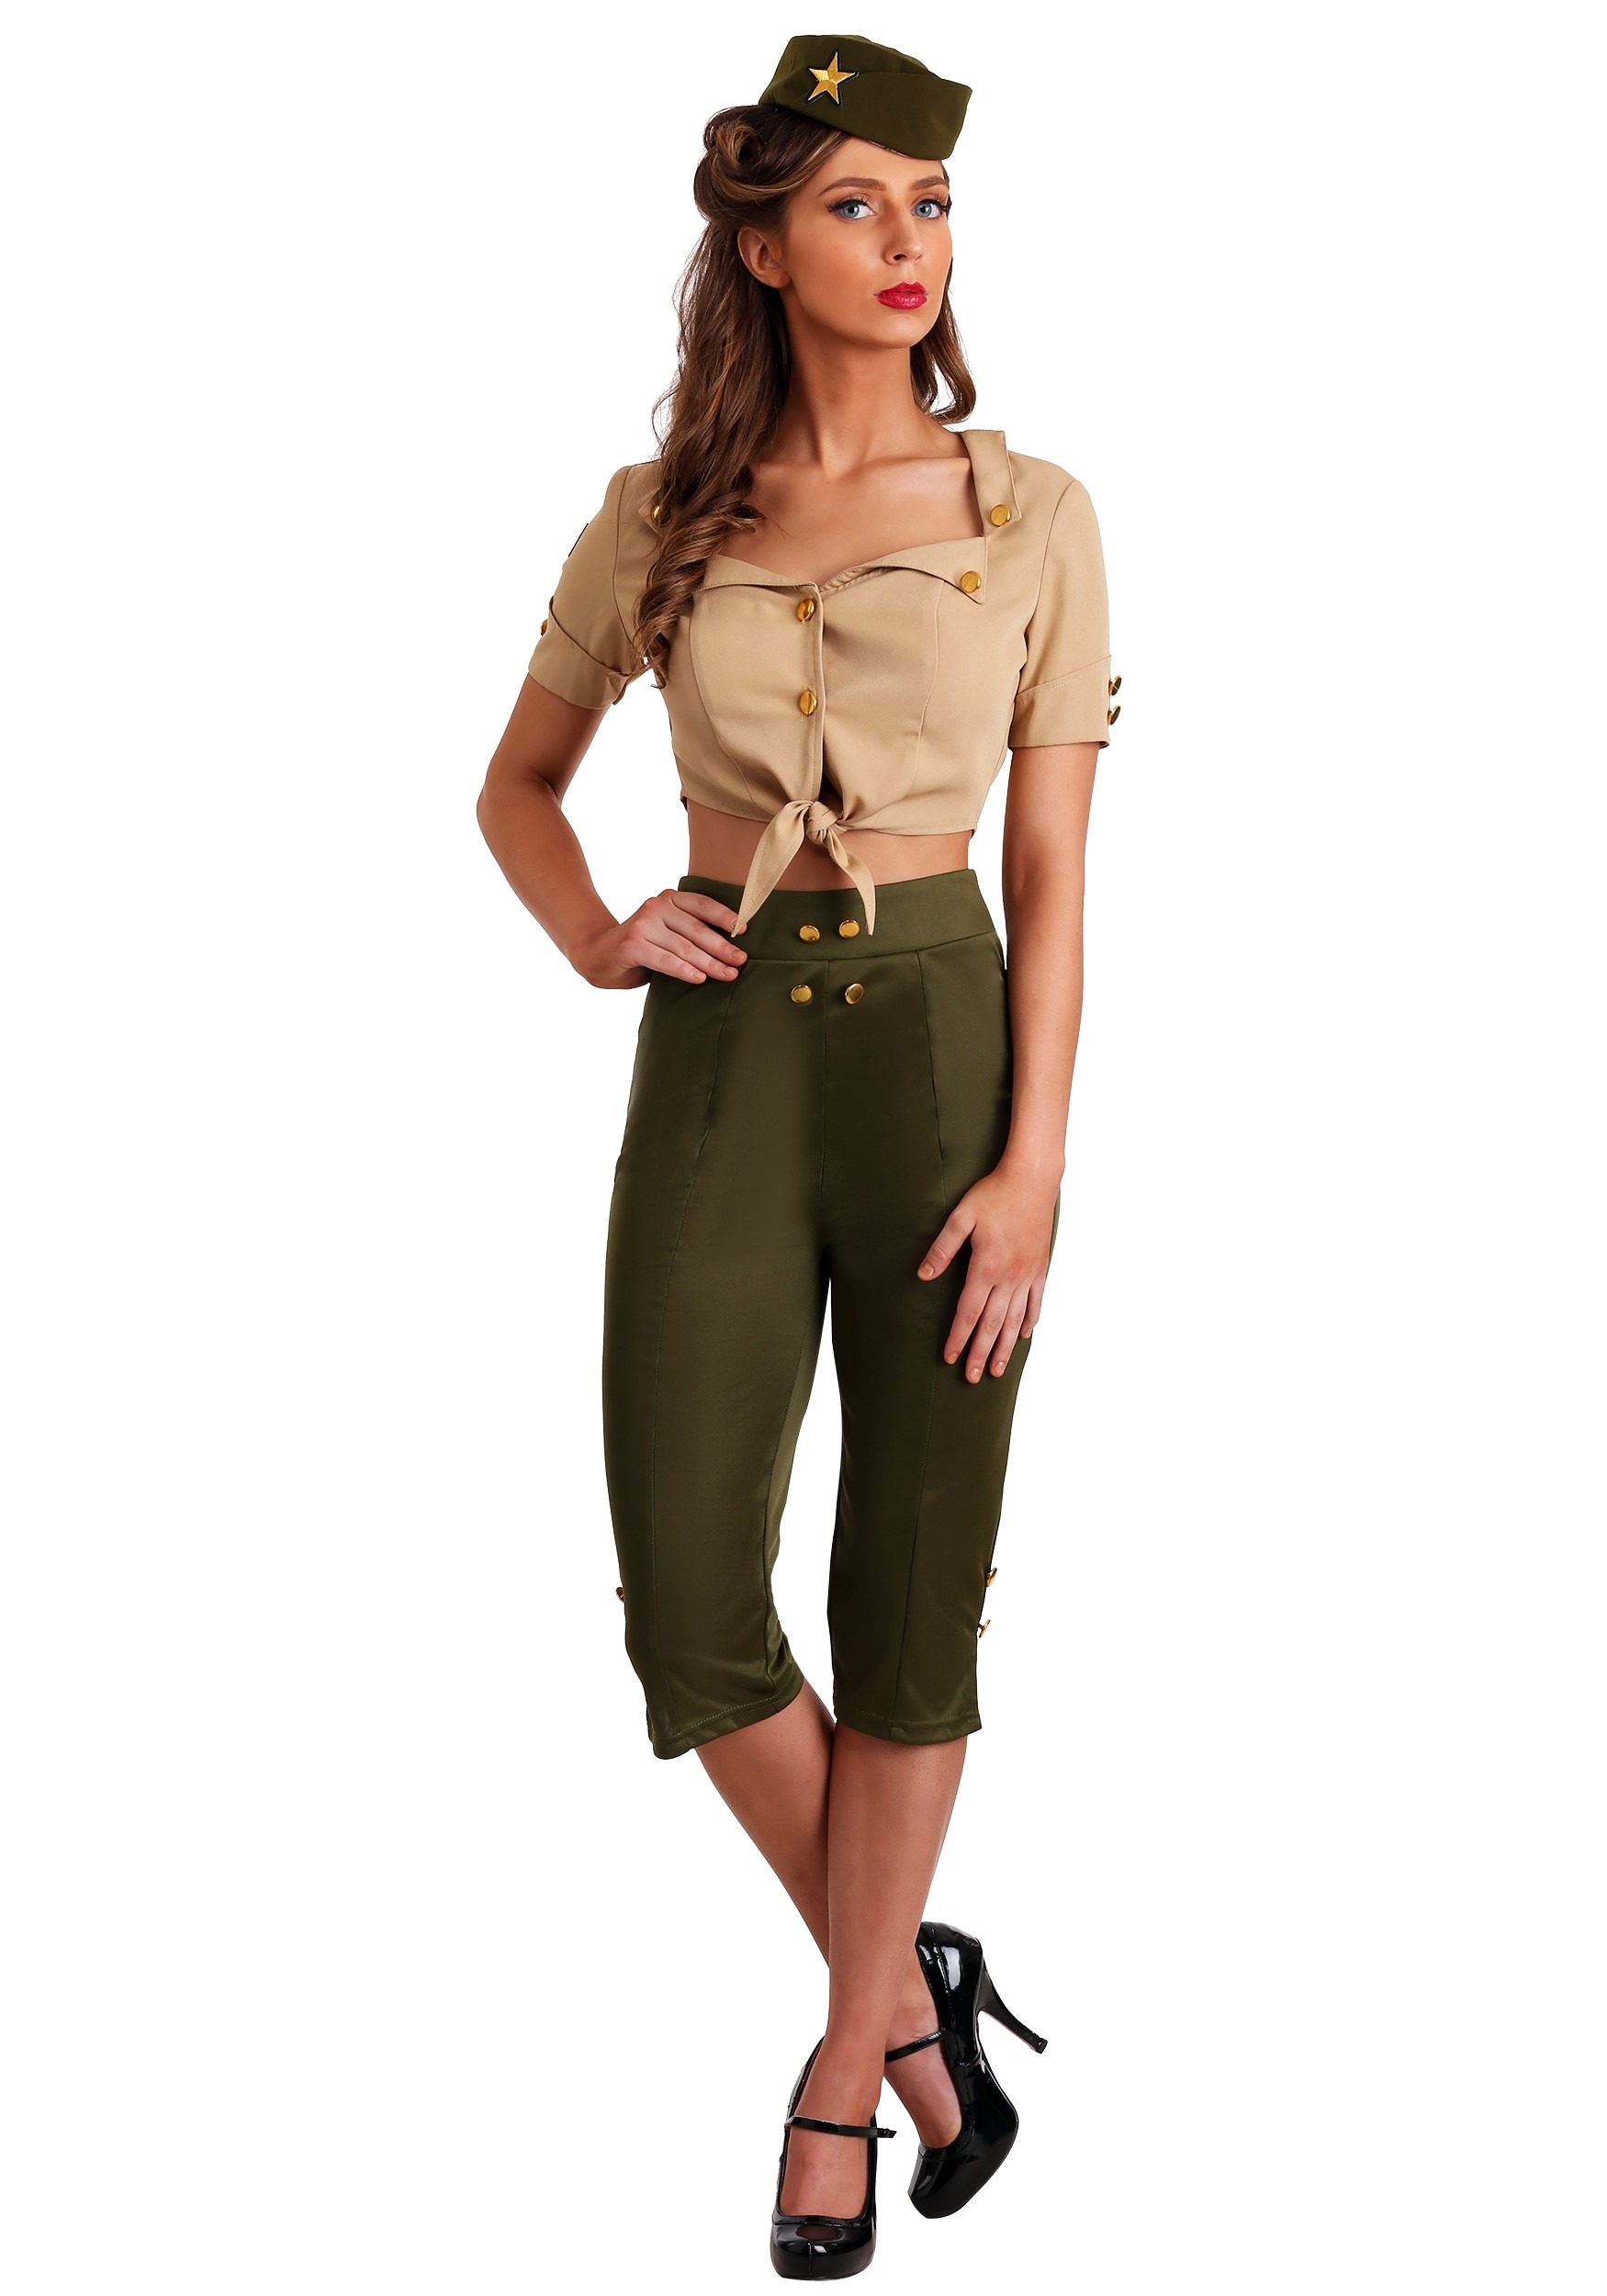 Vintage Pin Up Soldier Women’s Costume